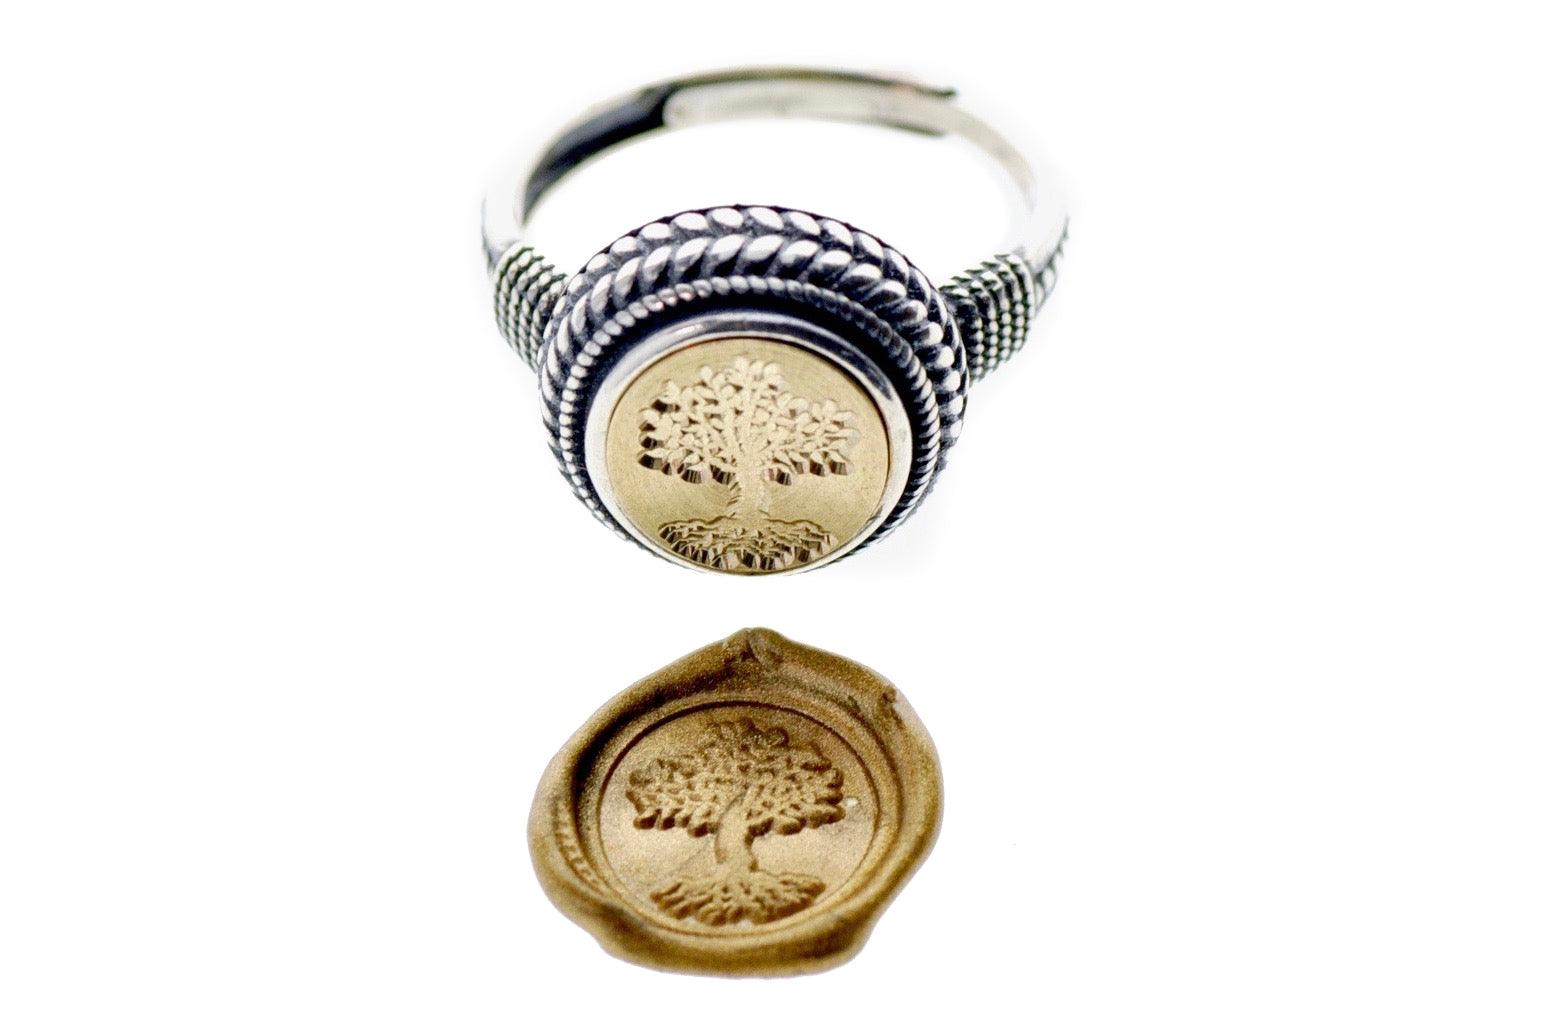 Tree of Life Signet Ring - Backtozero B20 - 10mm, 10mm ring, 10w, accessory, Copper, her, jewelry, Laurel Wreath, Nature, ring, seal, seal ring, signet ring, size 6, size 7, size 8, Tree, wax seal, wax seal ring, wax seal stamp, wreath